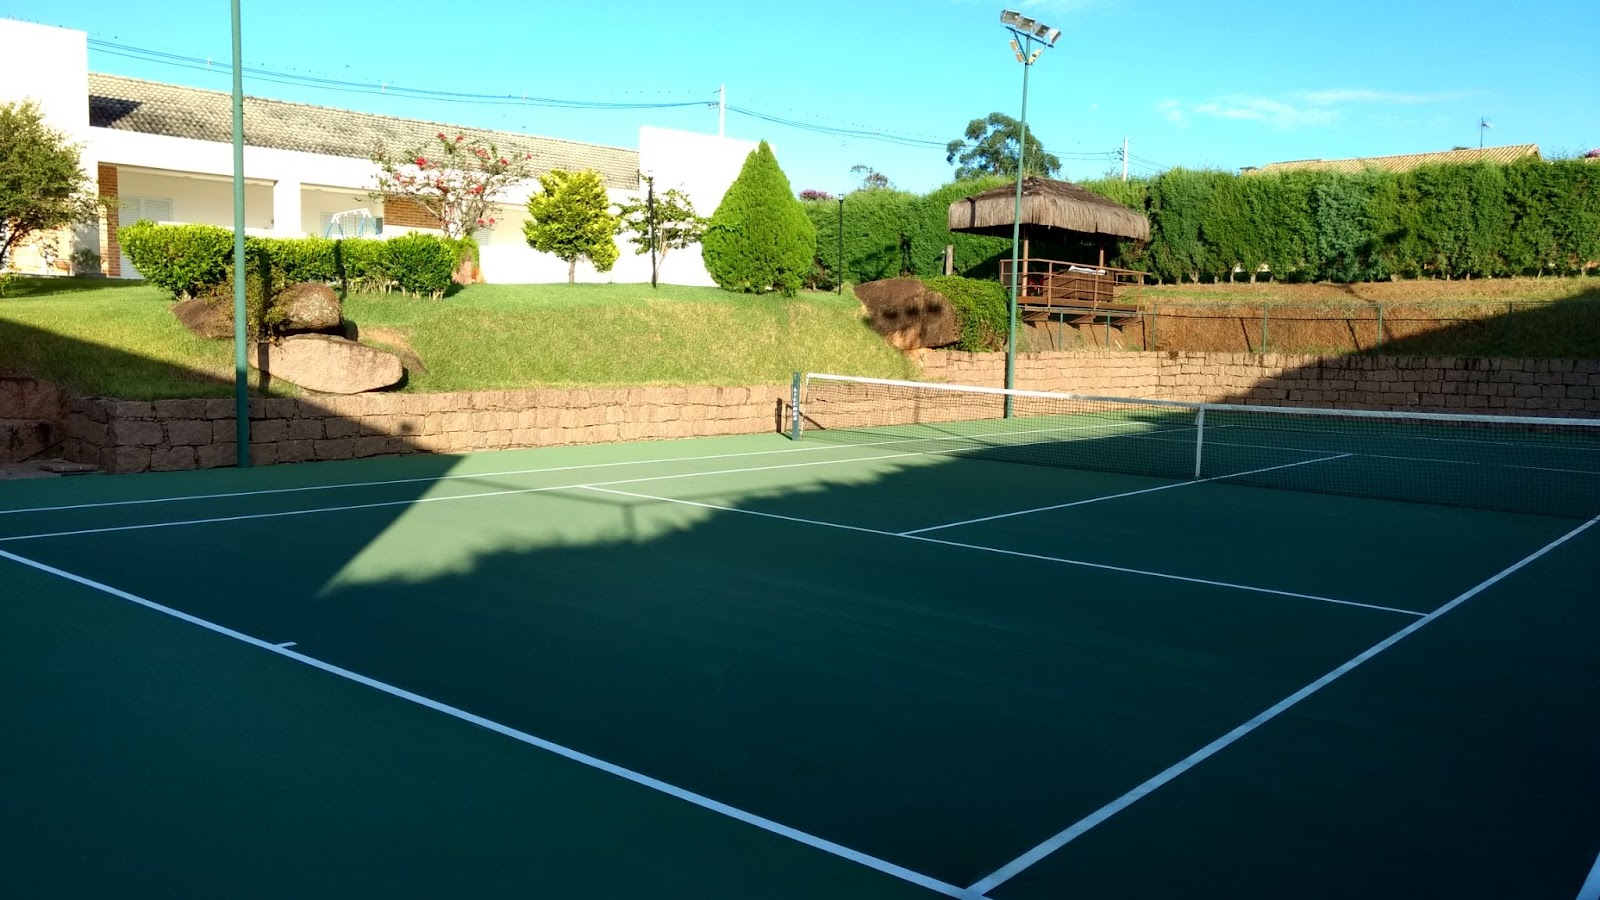 Game, Set, Match! Perfect your serve in these listings with a tennis court